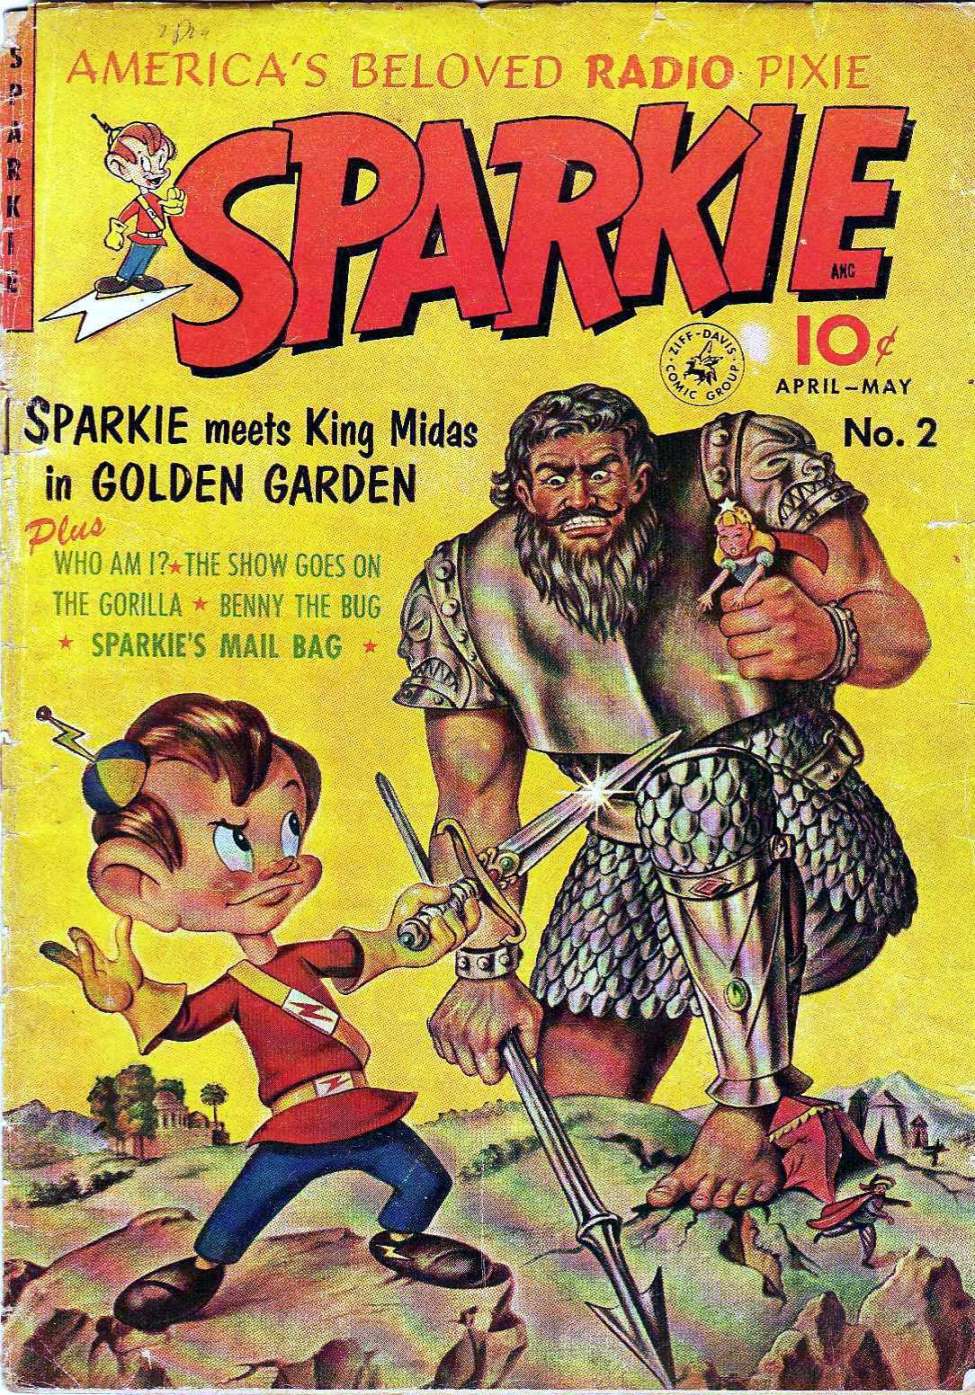 Comic Book Cover For Sparkie, Radio Pixie 2